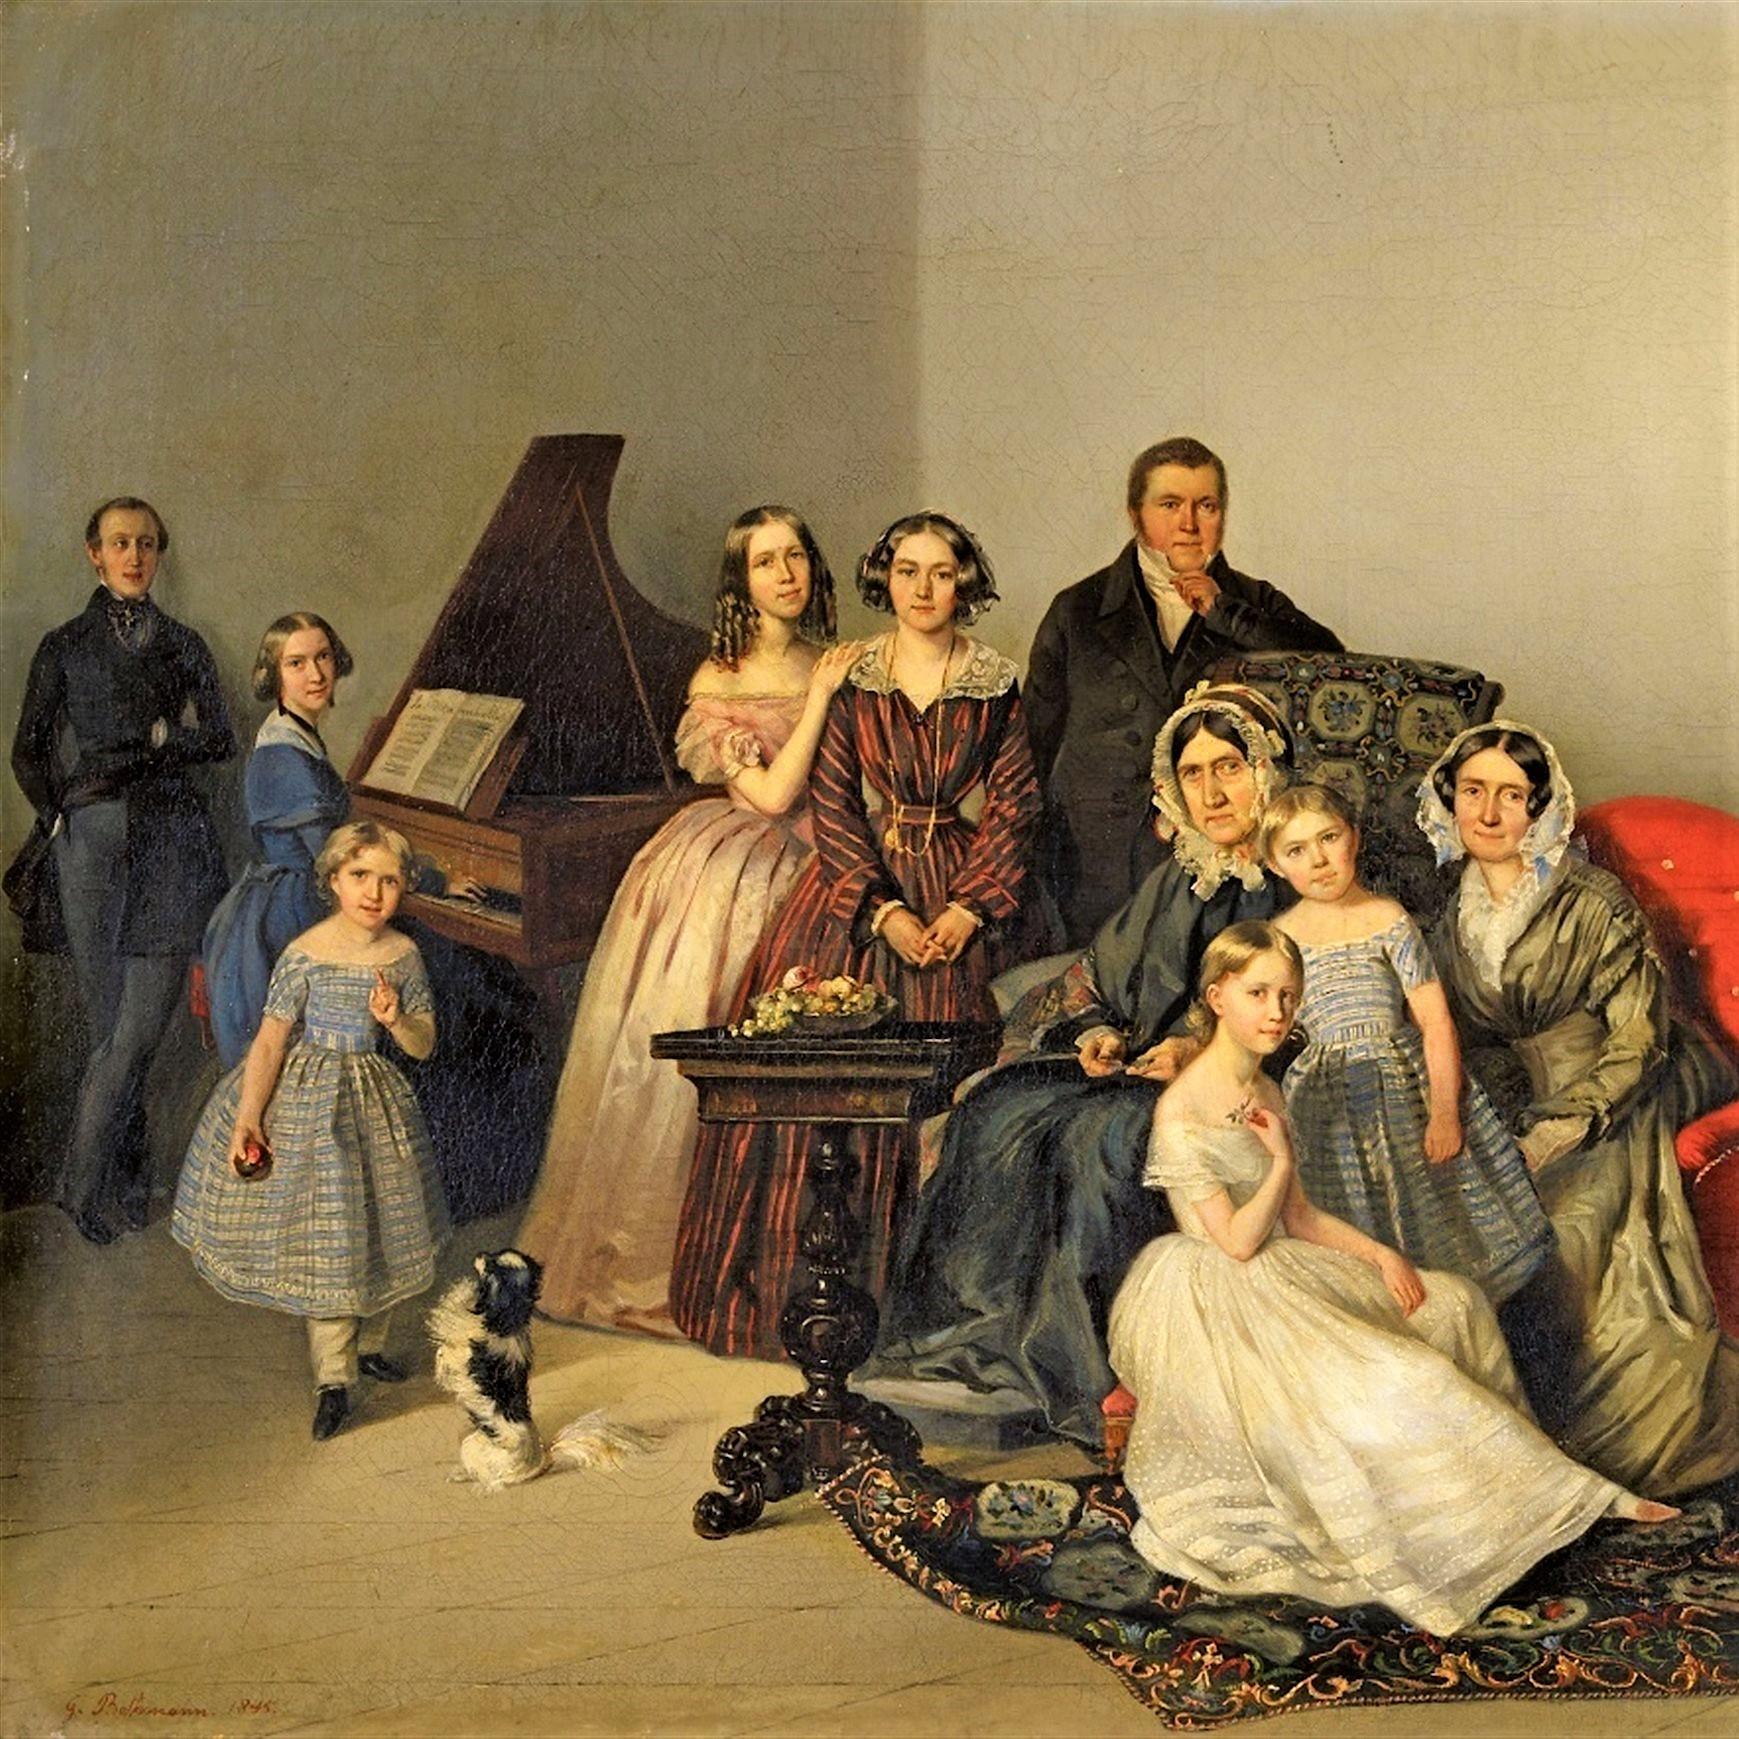 Portrait of the family of Dutchess Ozarowska Adèle (born Matthiessen)
The present work depicts the family of the owner of a porcelain factory in St. Petersburg. The back of the (possibly original) frame bears a hand-written label listing the family